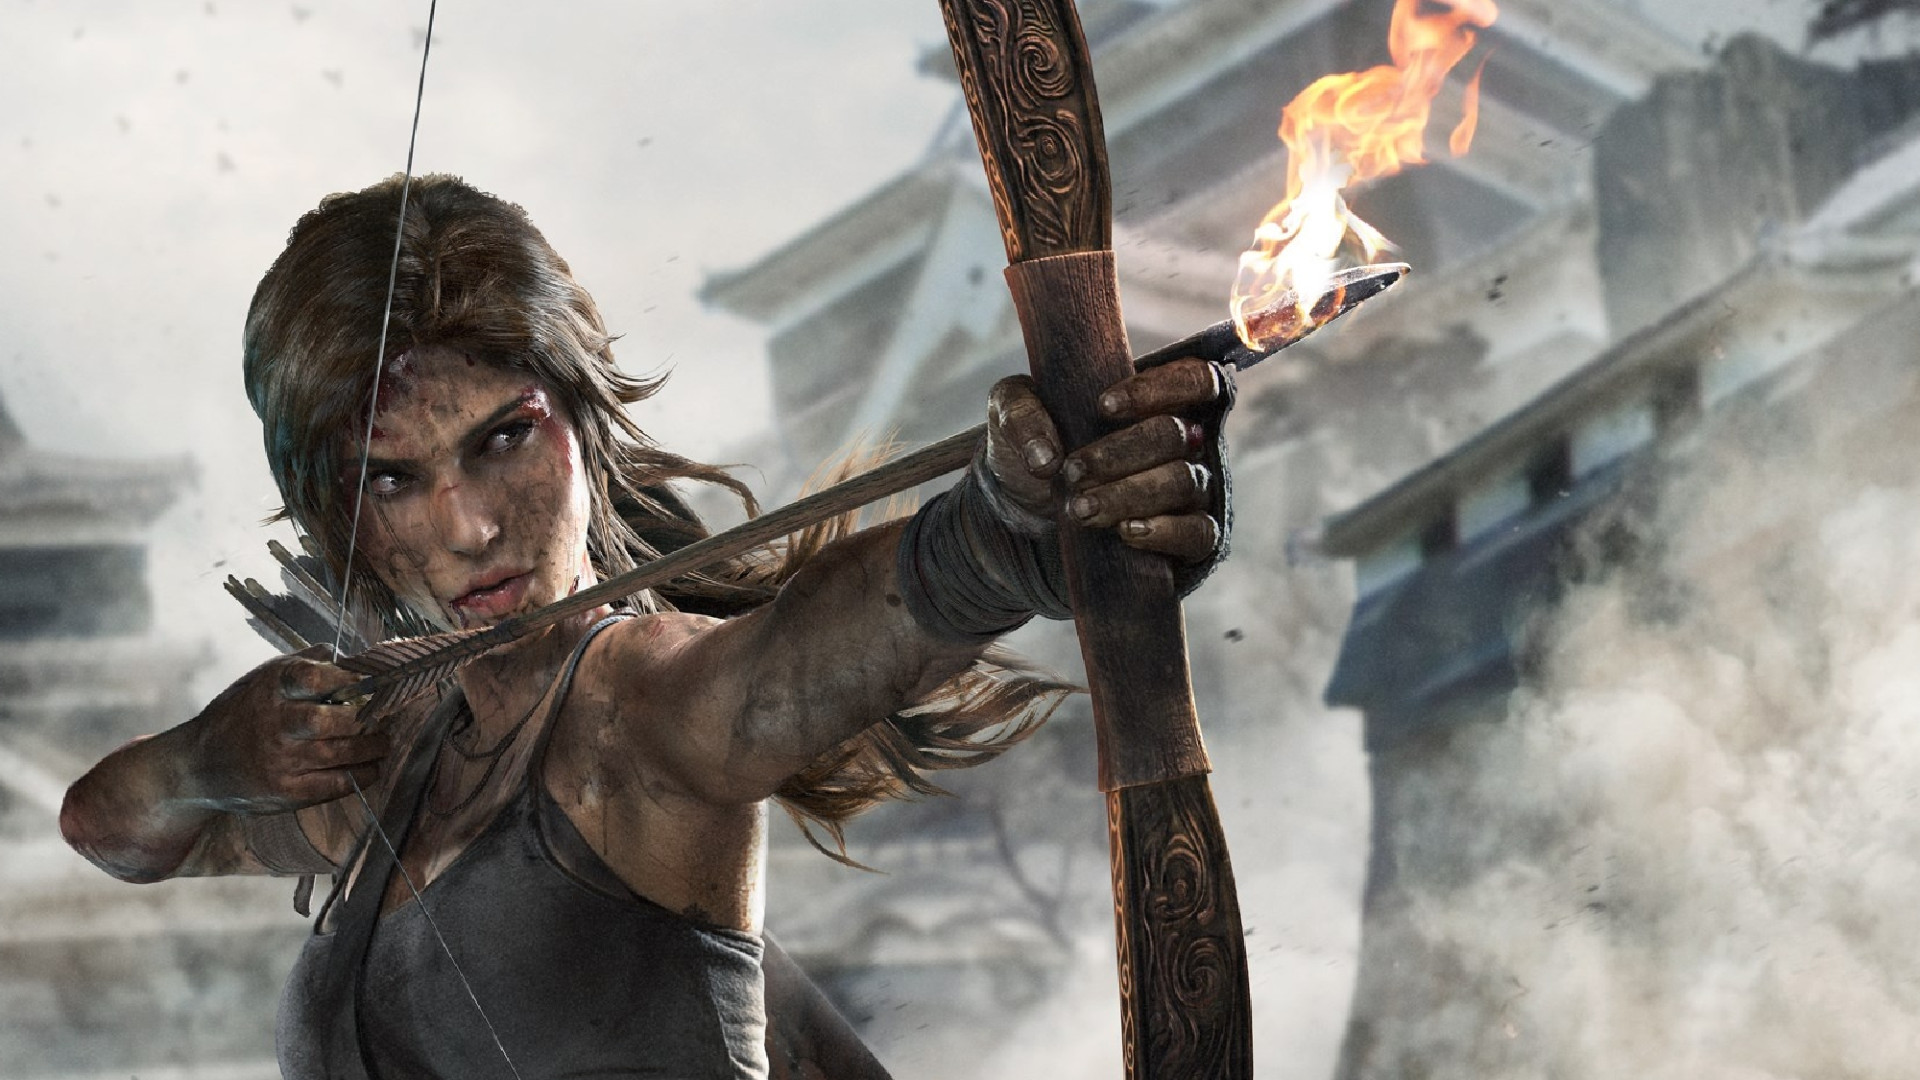 A new Tomb Raider game is in development in Unreal Engine 5 | GamesRadar+